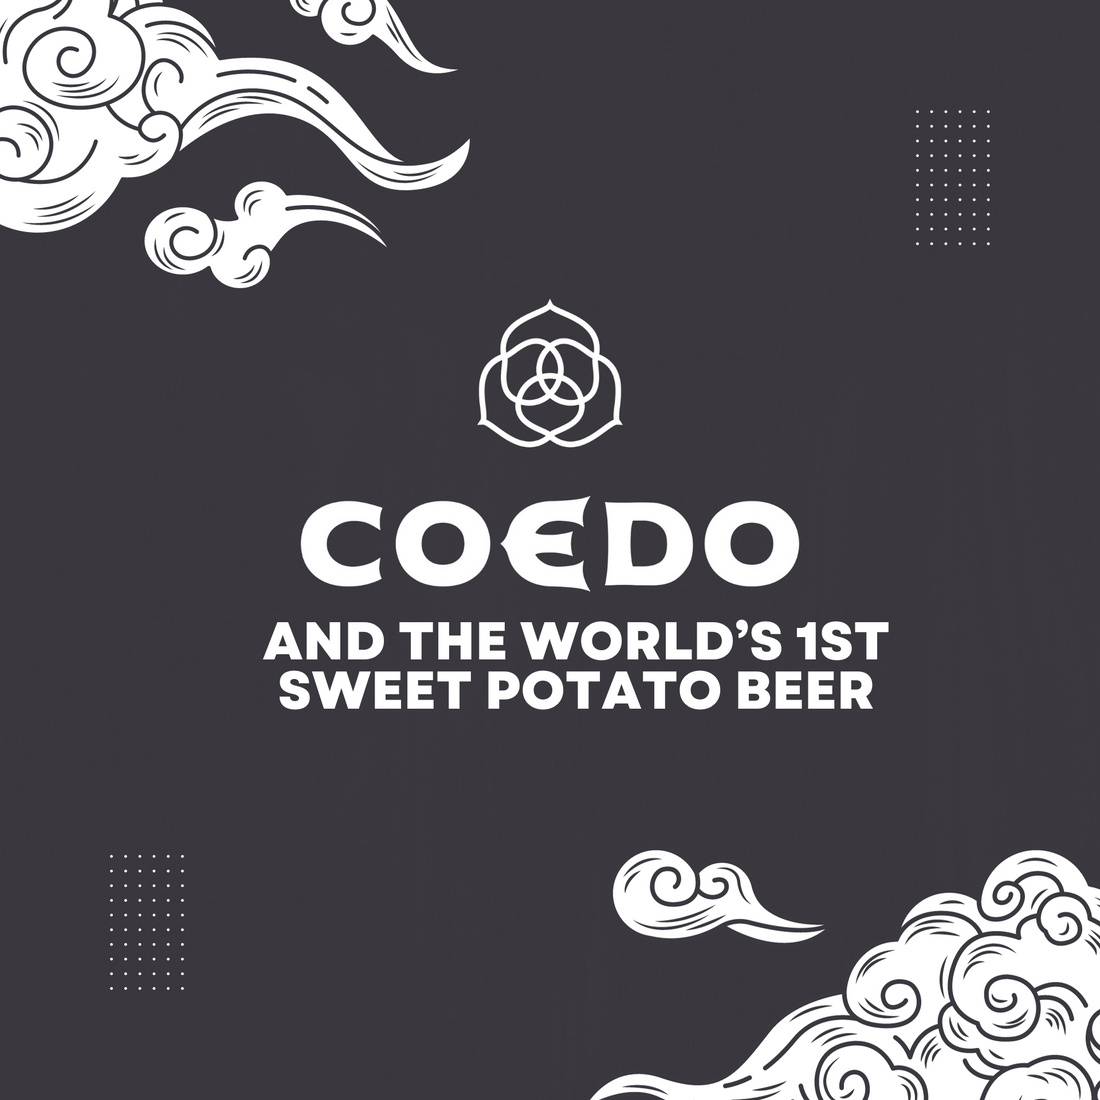 Coedo and the World's First Sweet Potato Beer